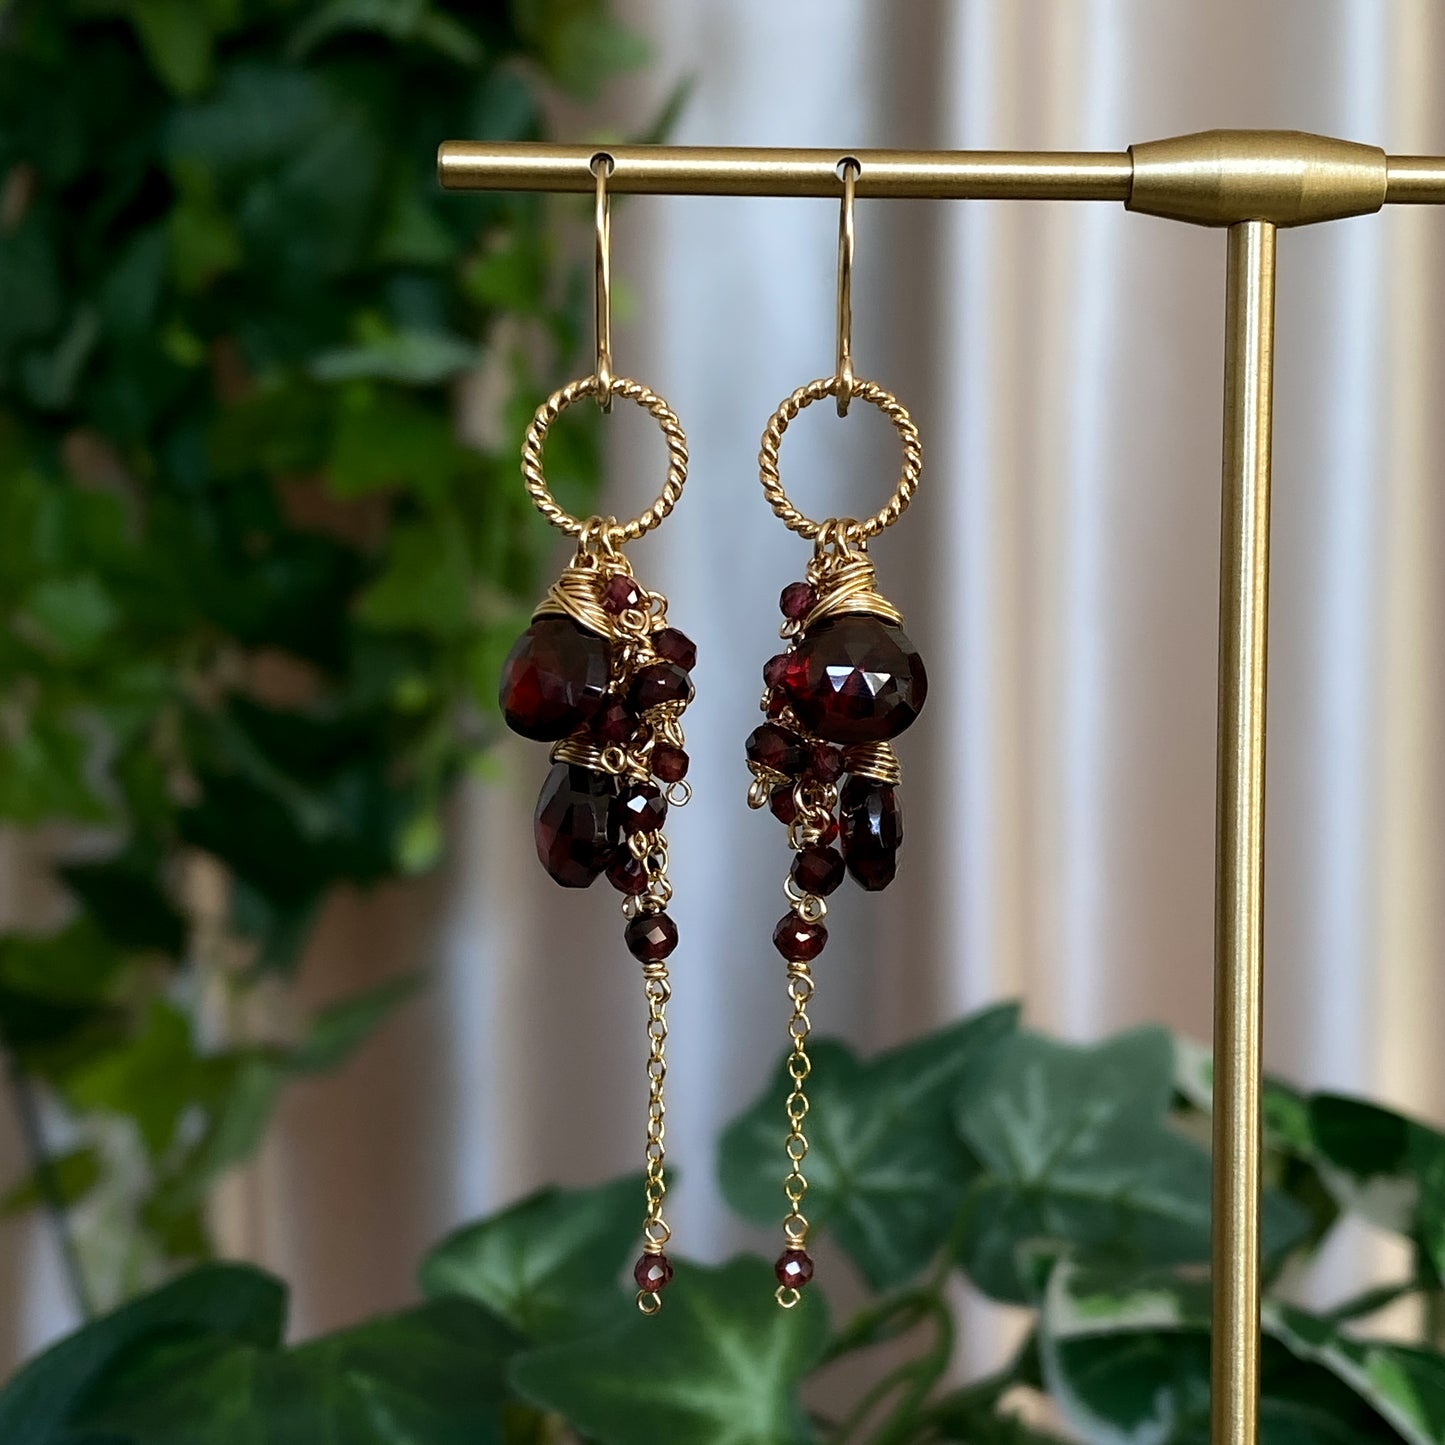 Gwendolyn ~ Garnet and 14k Gold Filled Layered Earrings